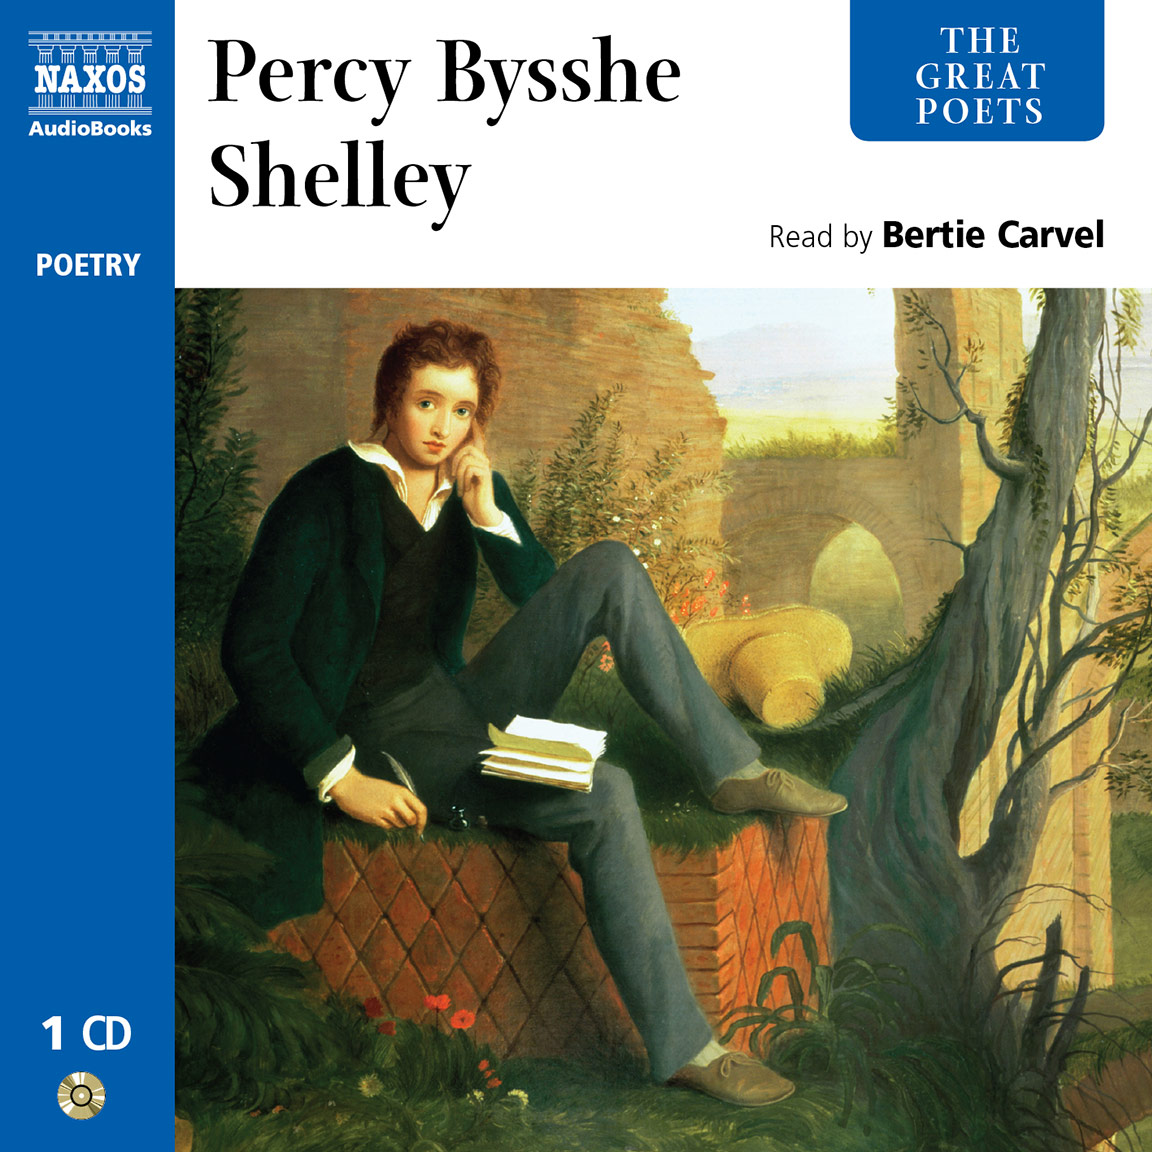 Percy Bysshe Shelley. Percy Bysshe Shelley и Байрон. Bysshe Shelley's book. Love's Philosophy by Percy Bysshe Shelley.